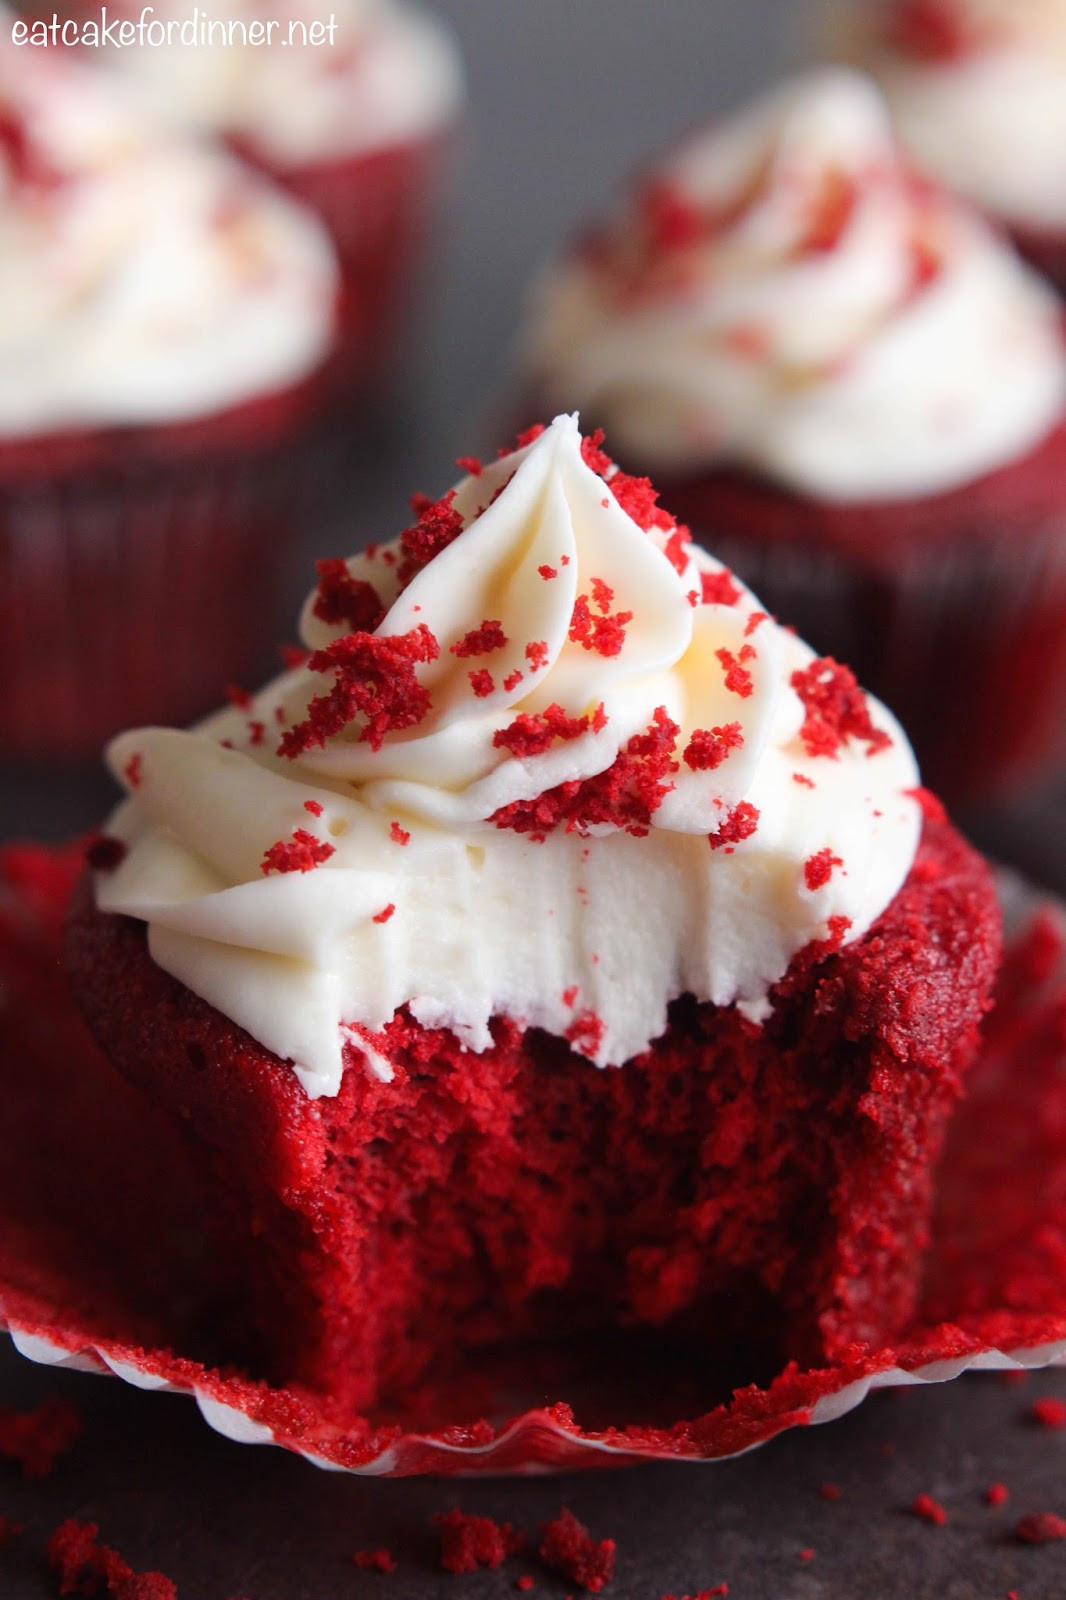 Red Velvet Cupcakes With Cream Cheese Frosting
 Eat Cake For Dinner The BEST Red Velvet Cupcakes with